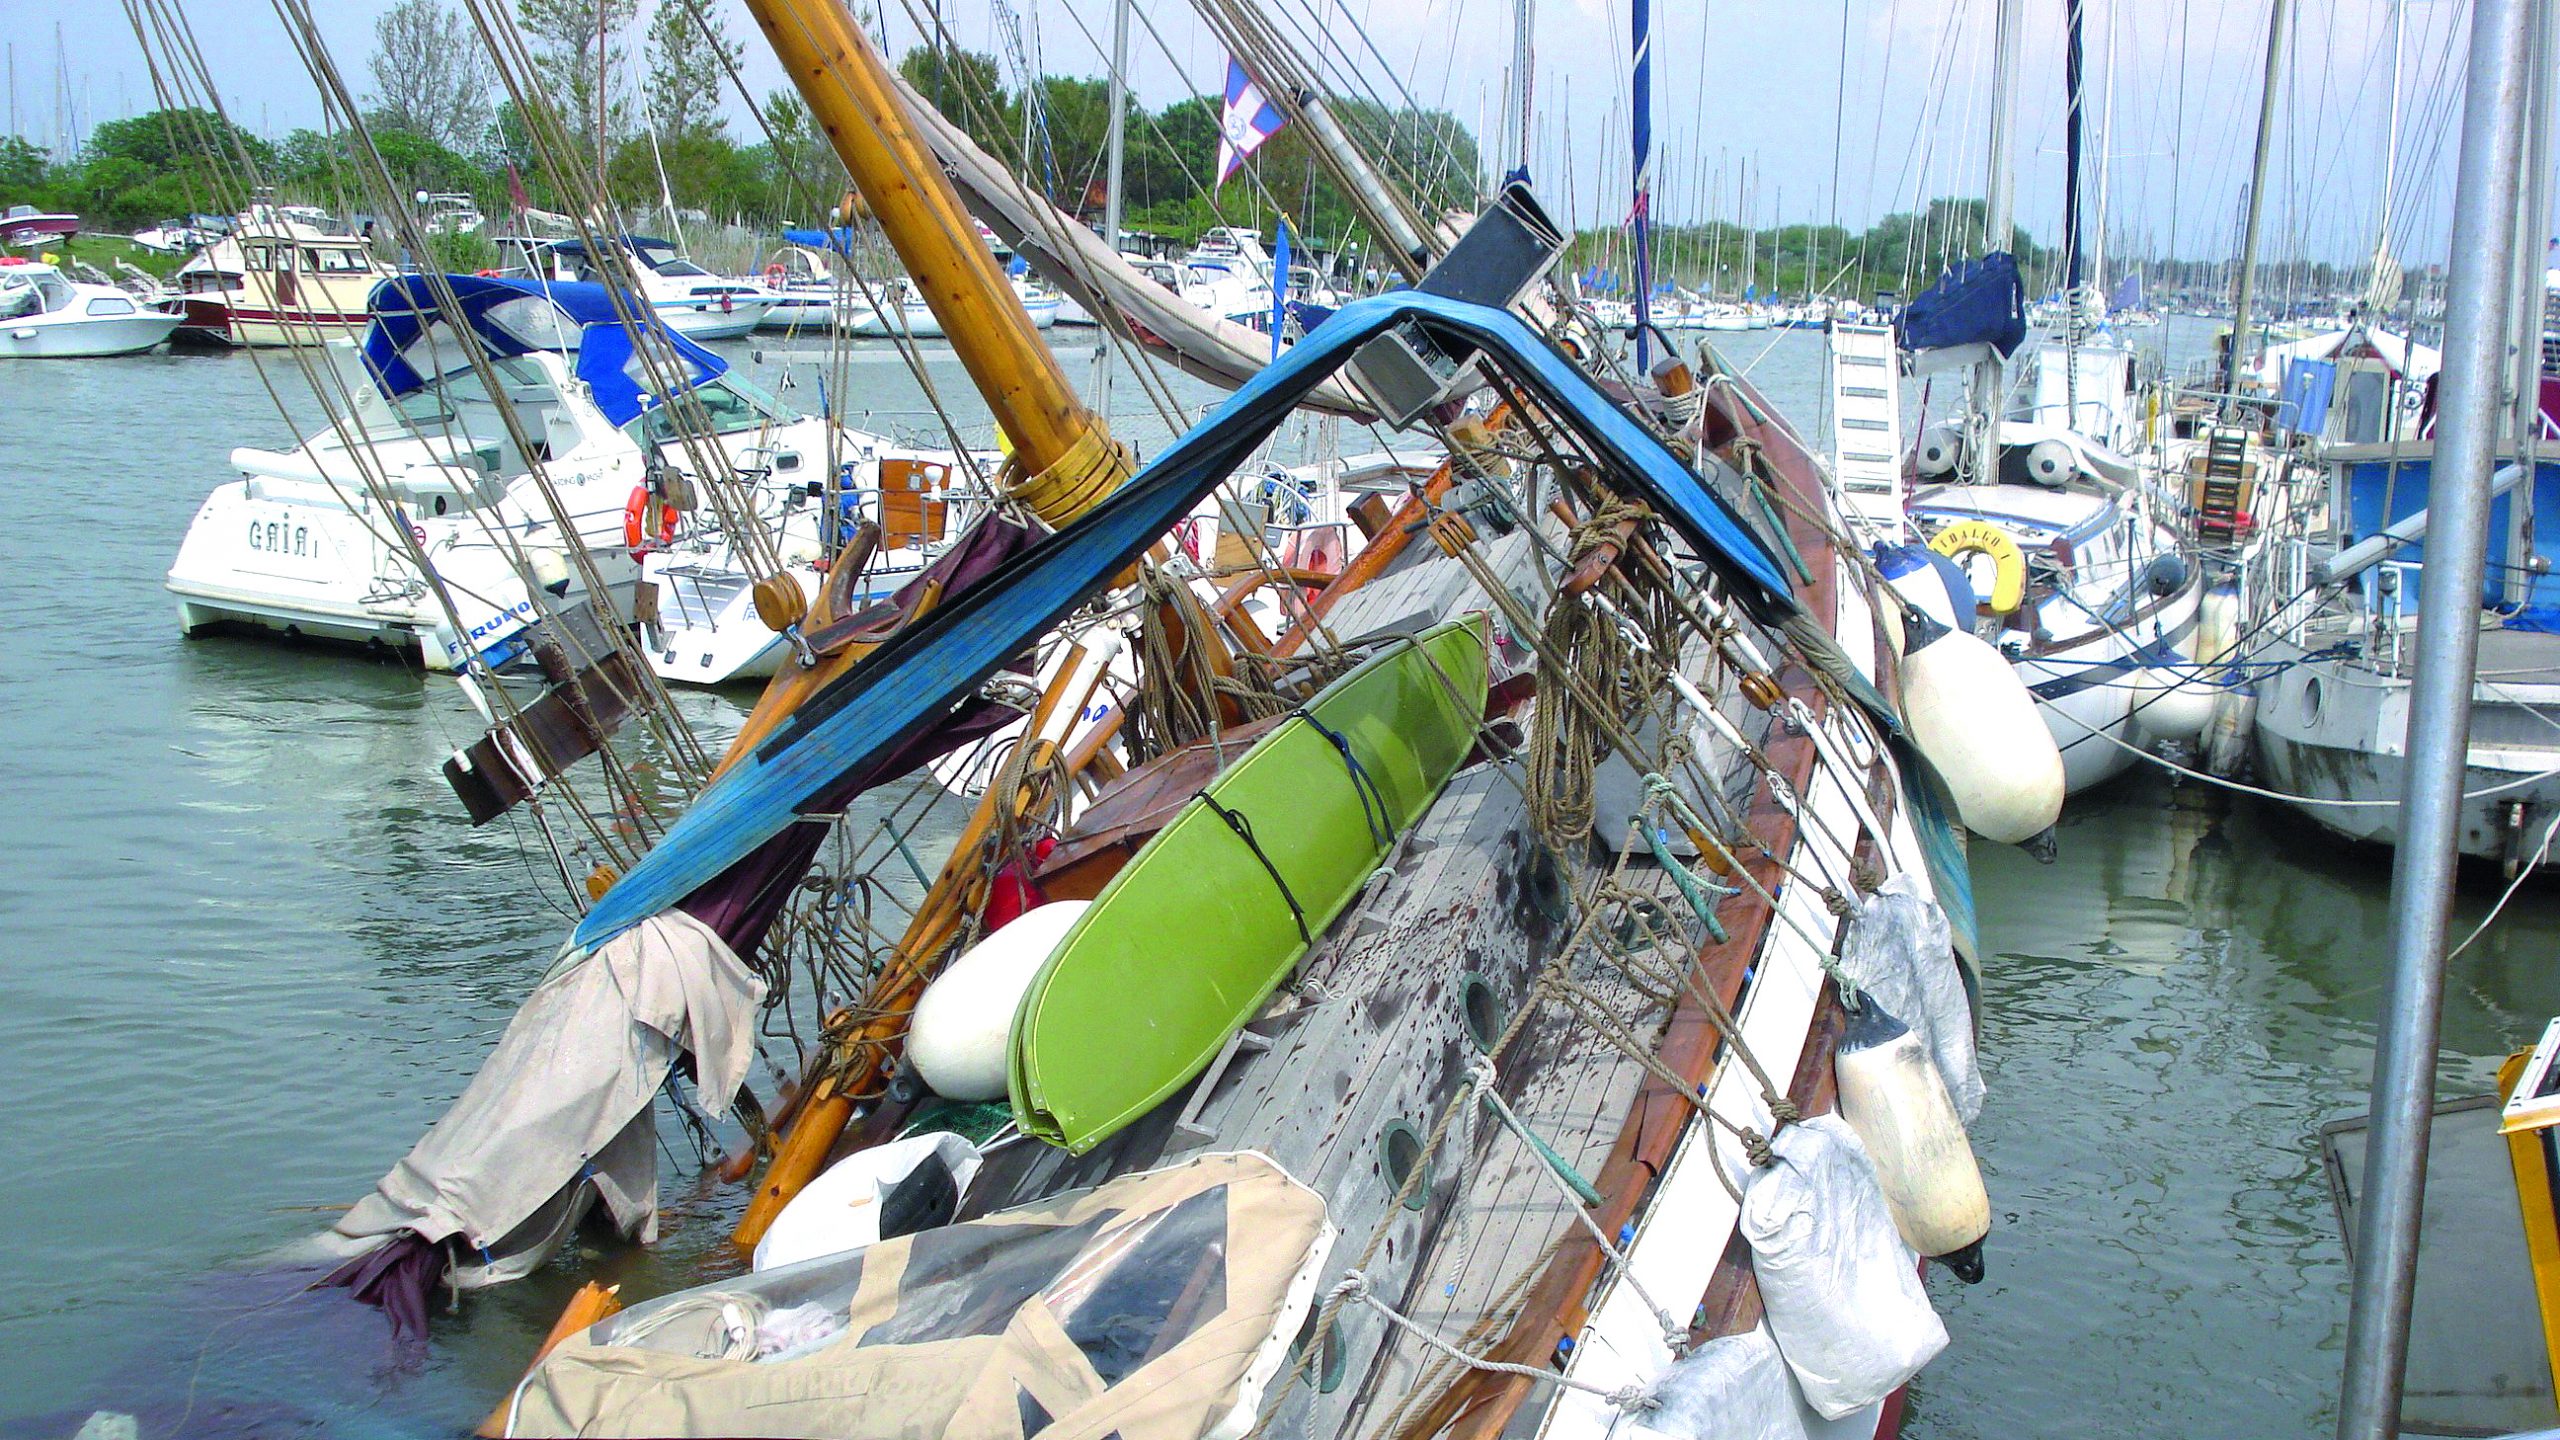 Most ports, harbours, marinas and yacht clubs require boat owners to be insured in case the worst happens